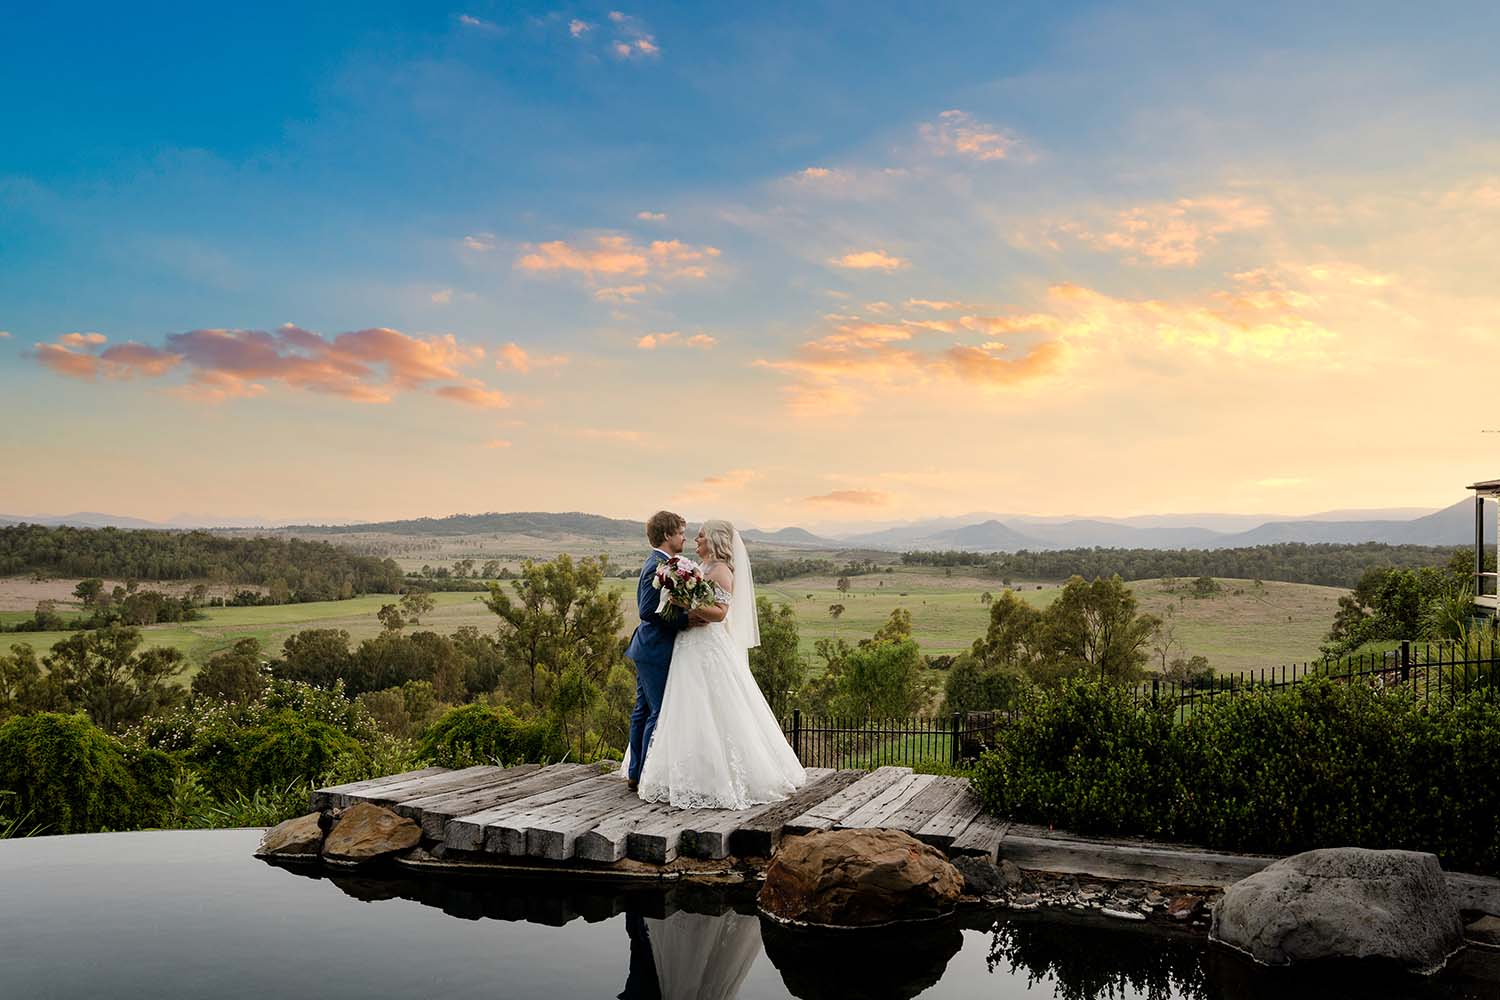 Wedding Photography - Bride and Groom embrace in front of Stunning Sunset over water